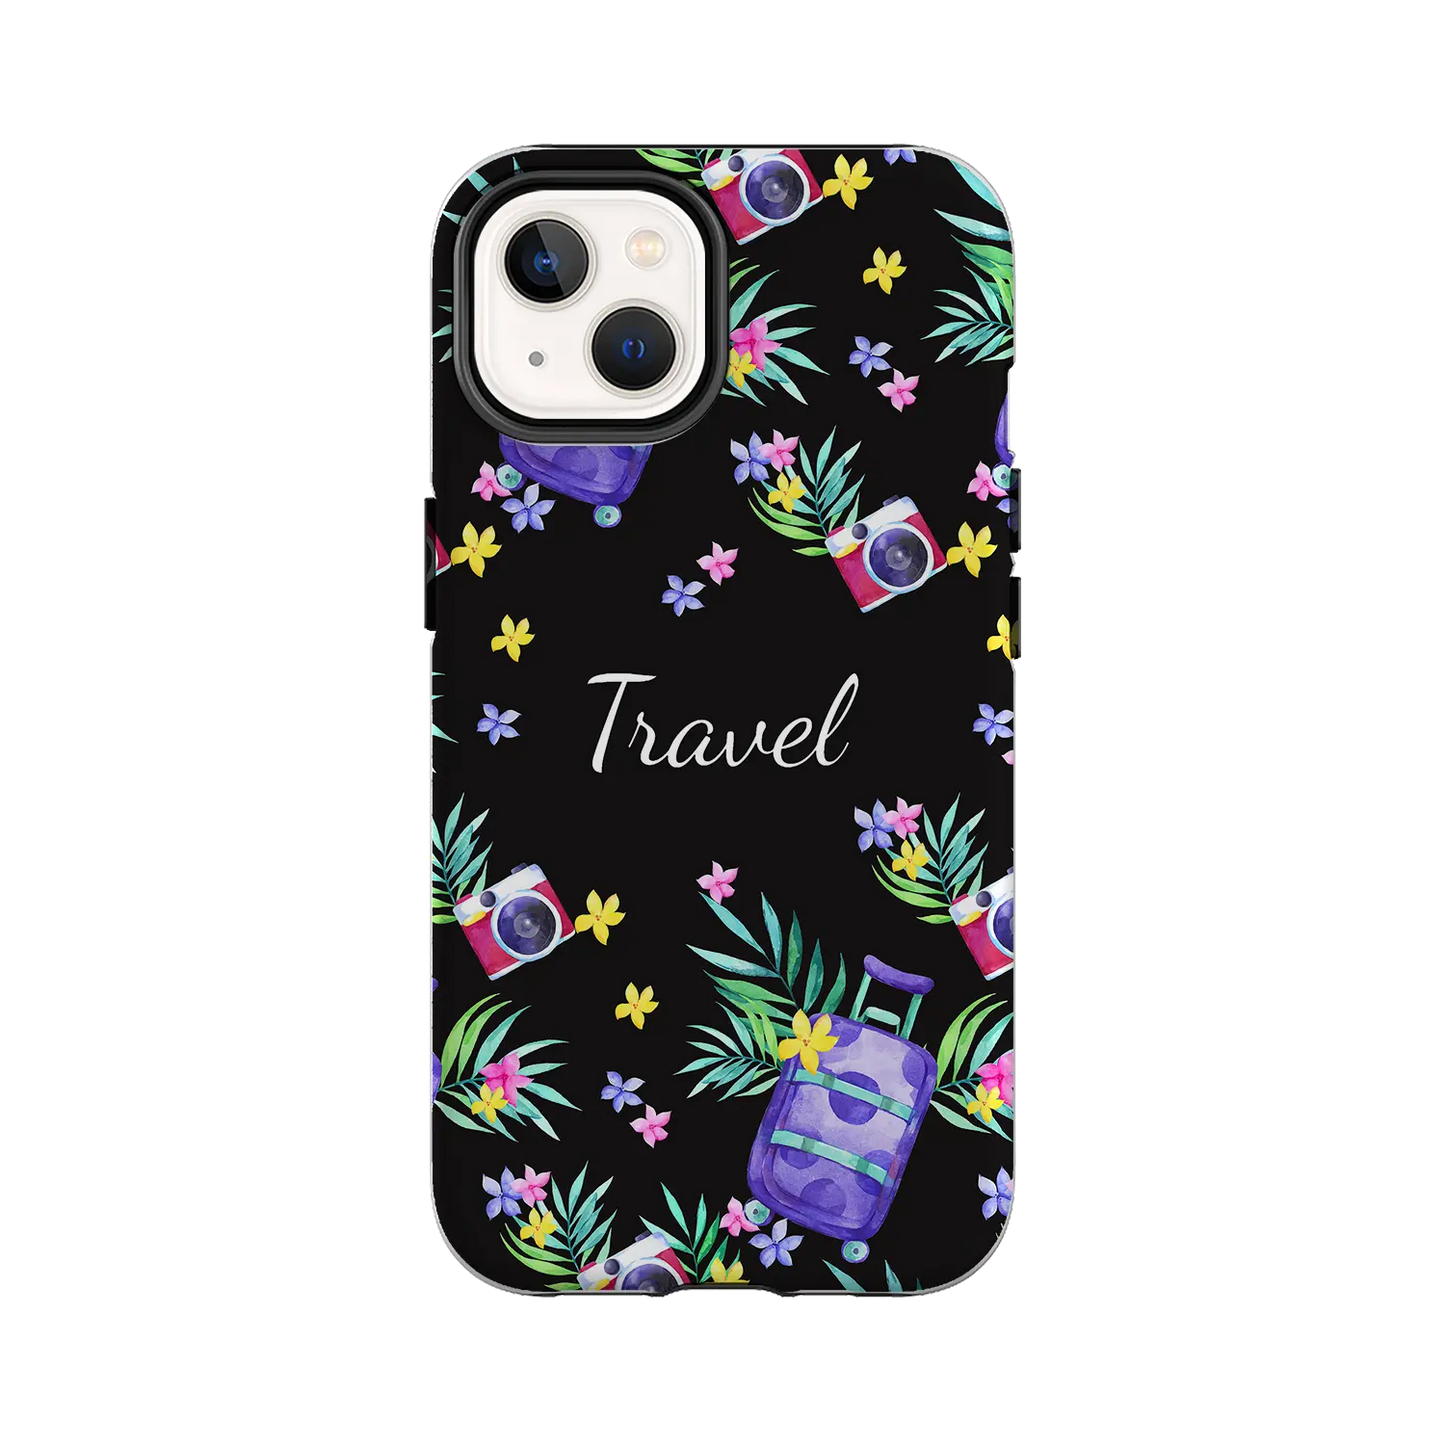 Suitcase Ready - Personalised iPhone Case